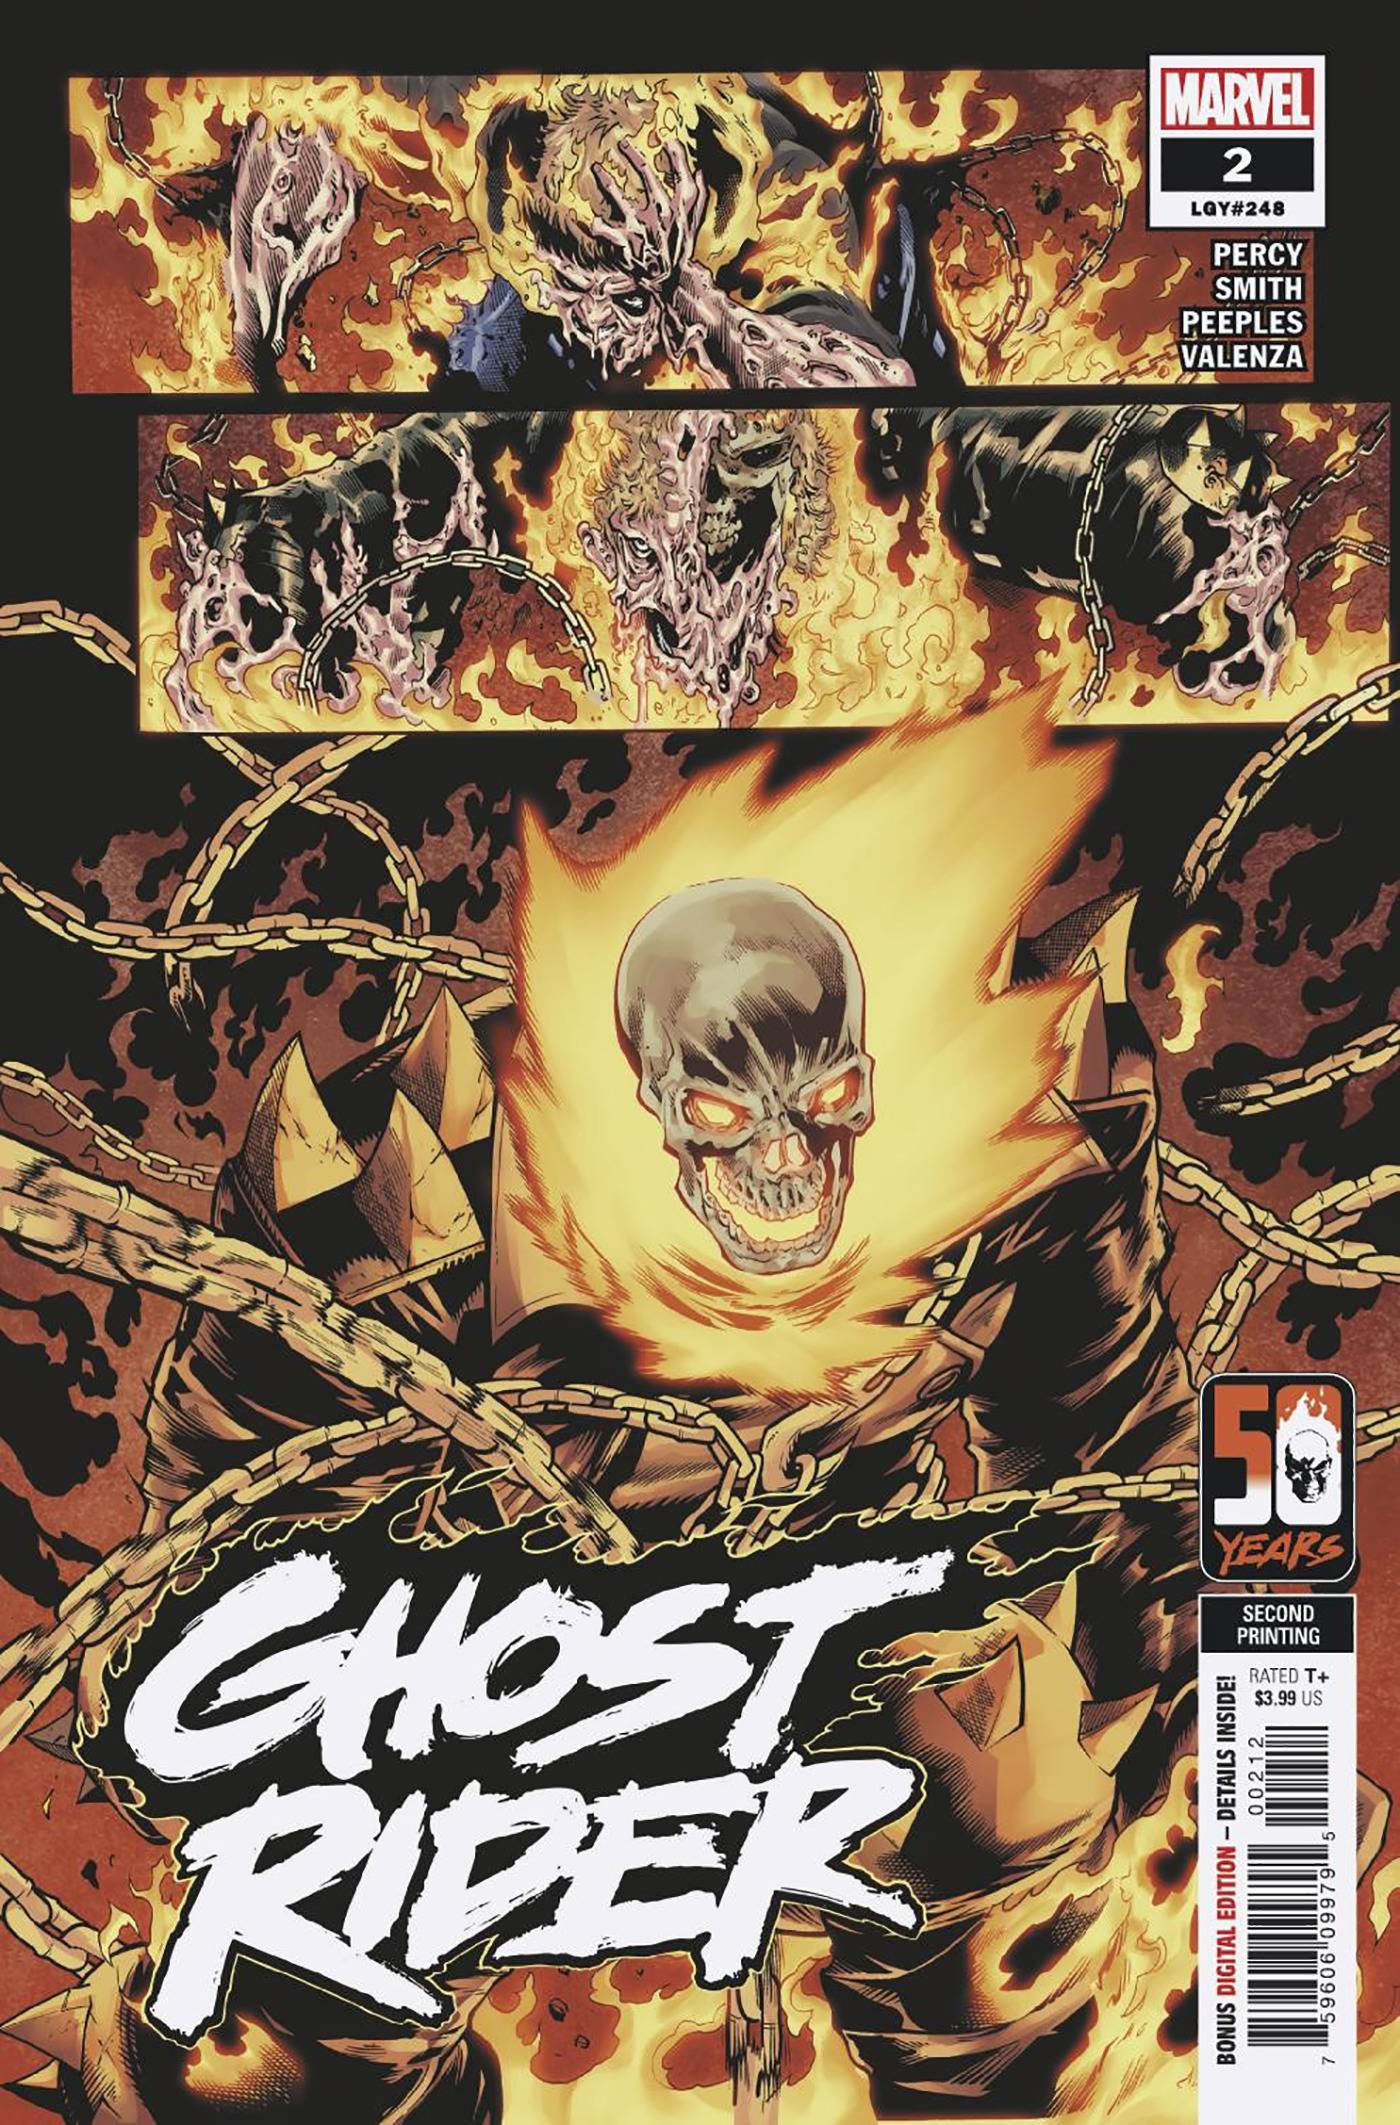 06/08/2022 GHOST RIDER #2 2ND PTG CORY SMITH VARIANT